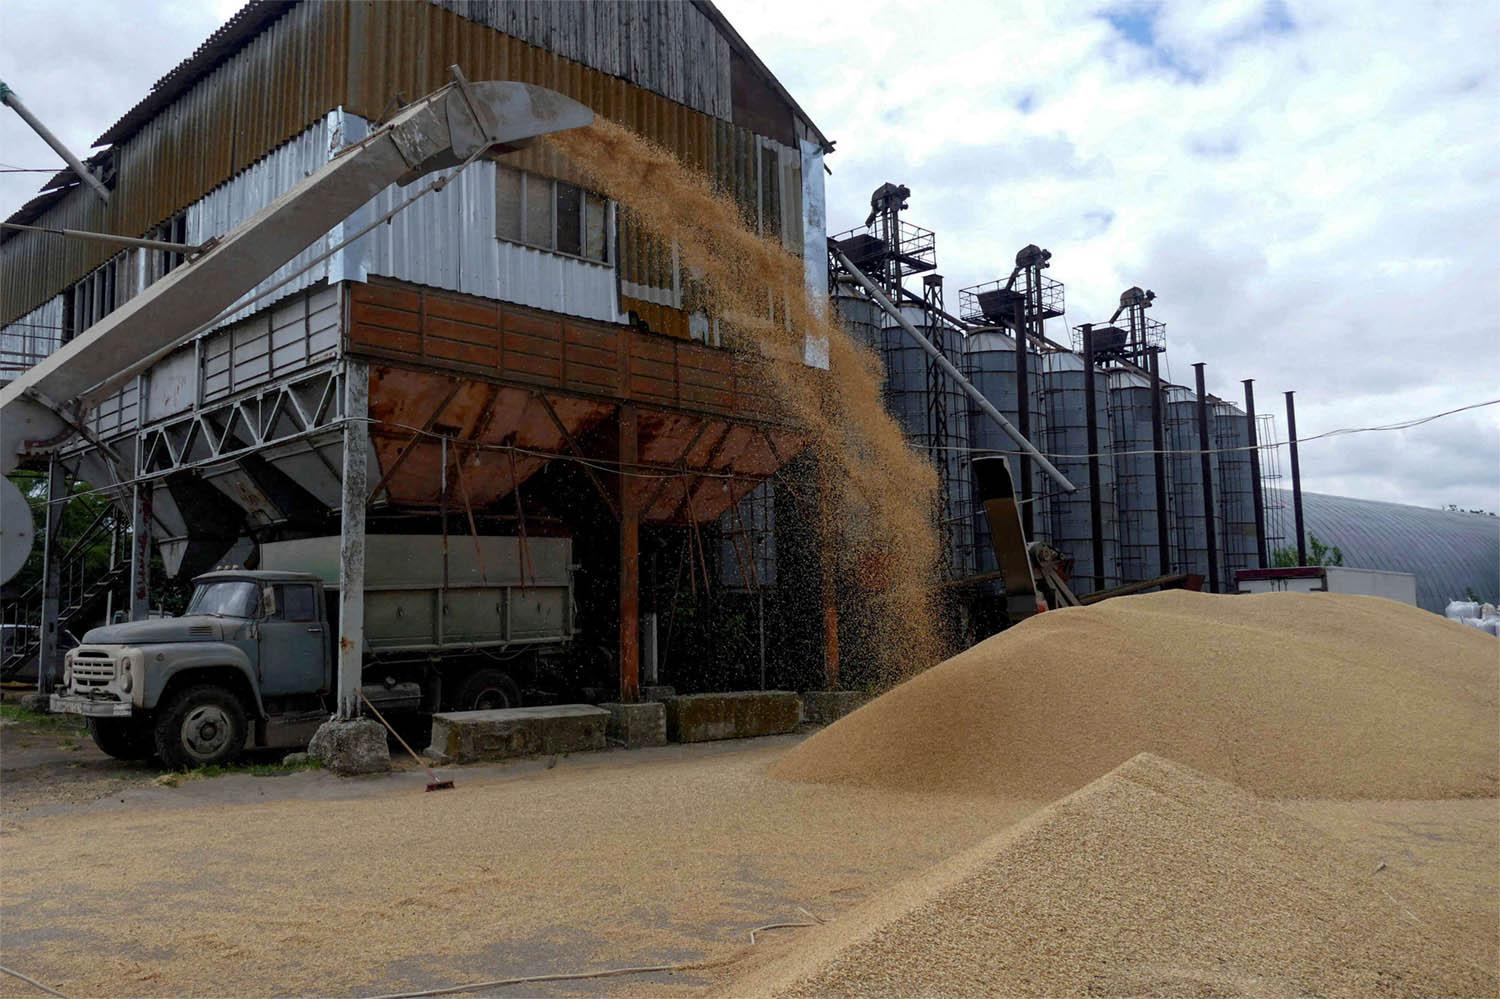 Russian and Ukrainian officials have blamed each other for the blocked grain shipments